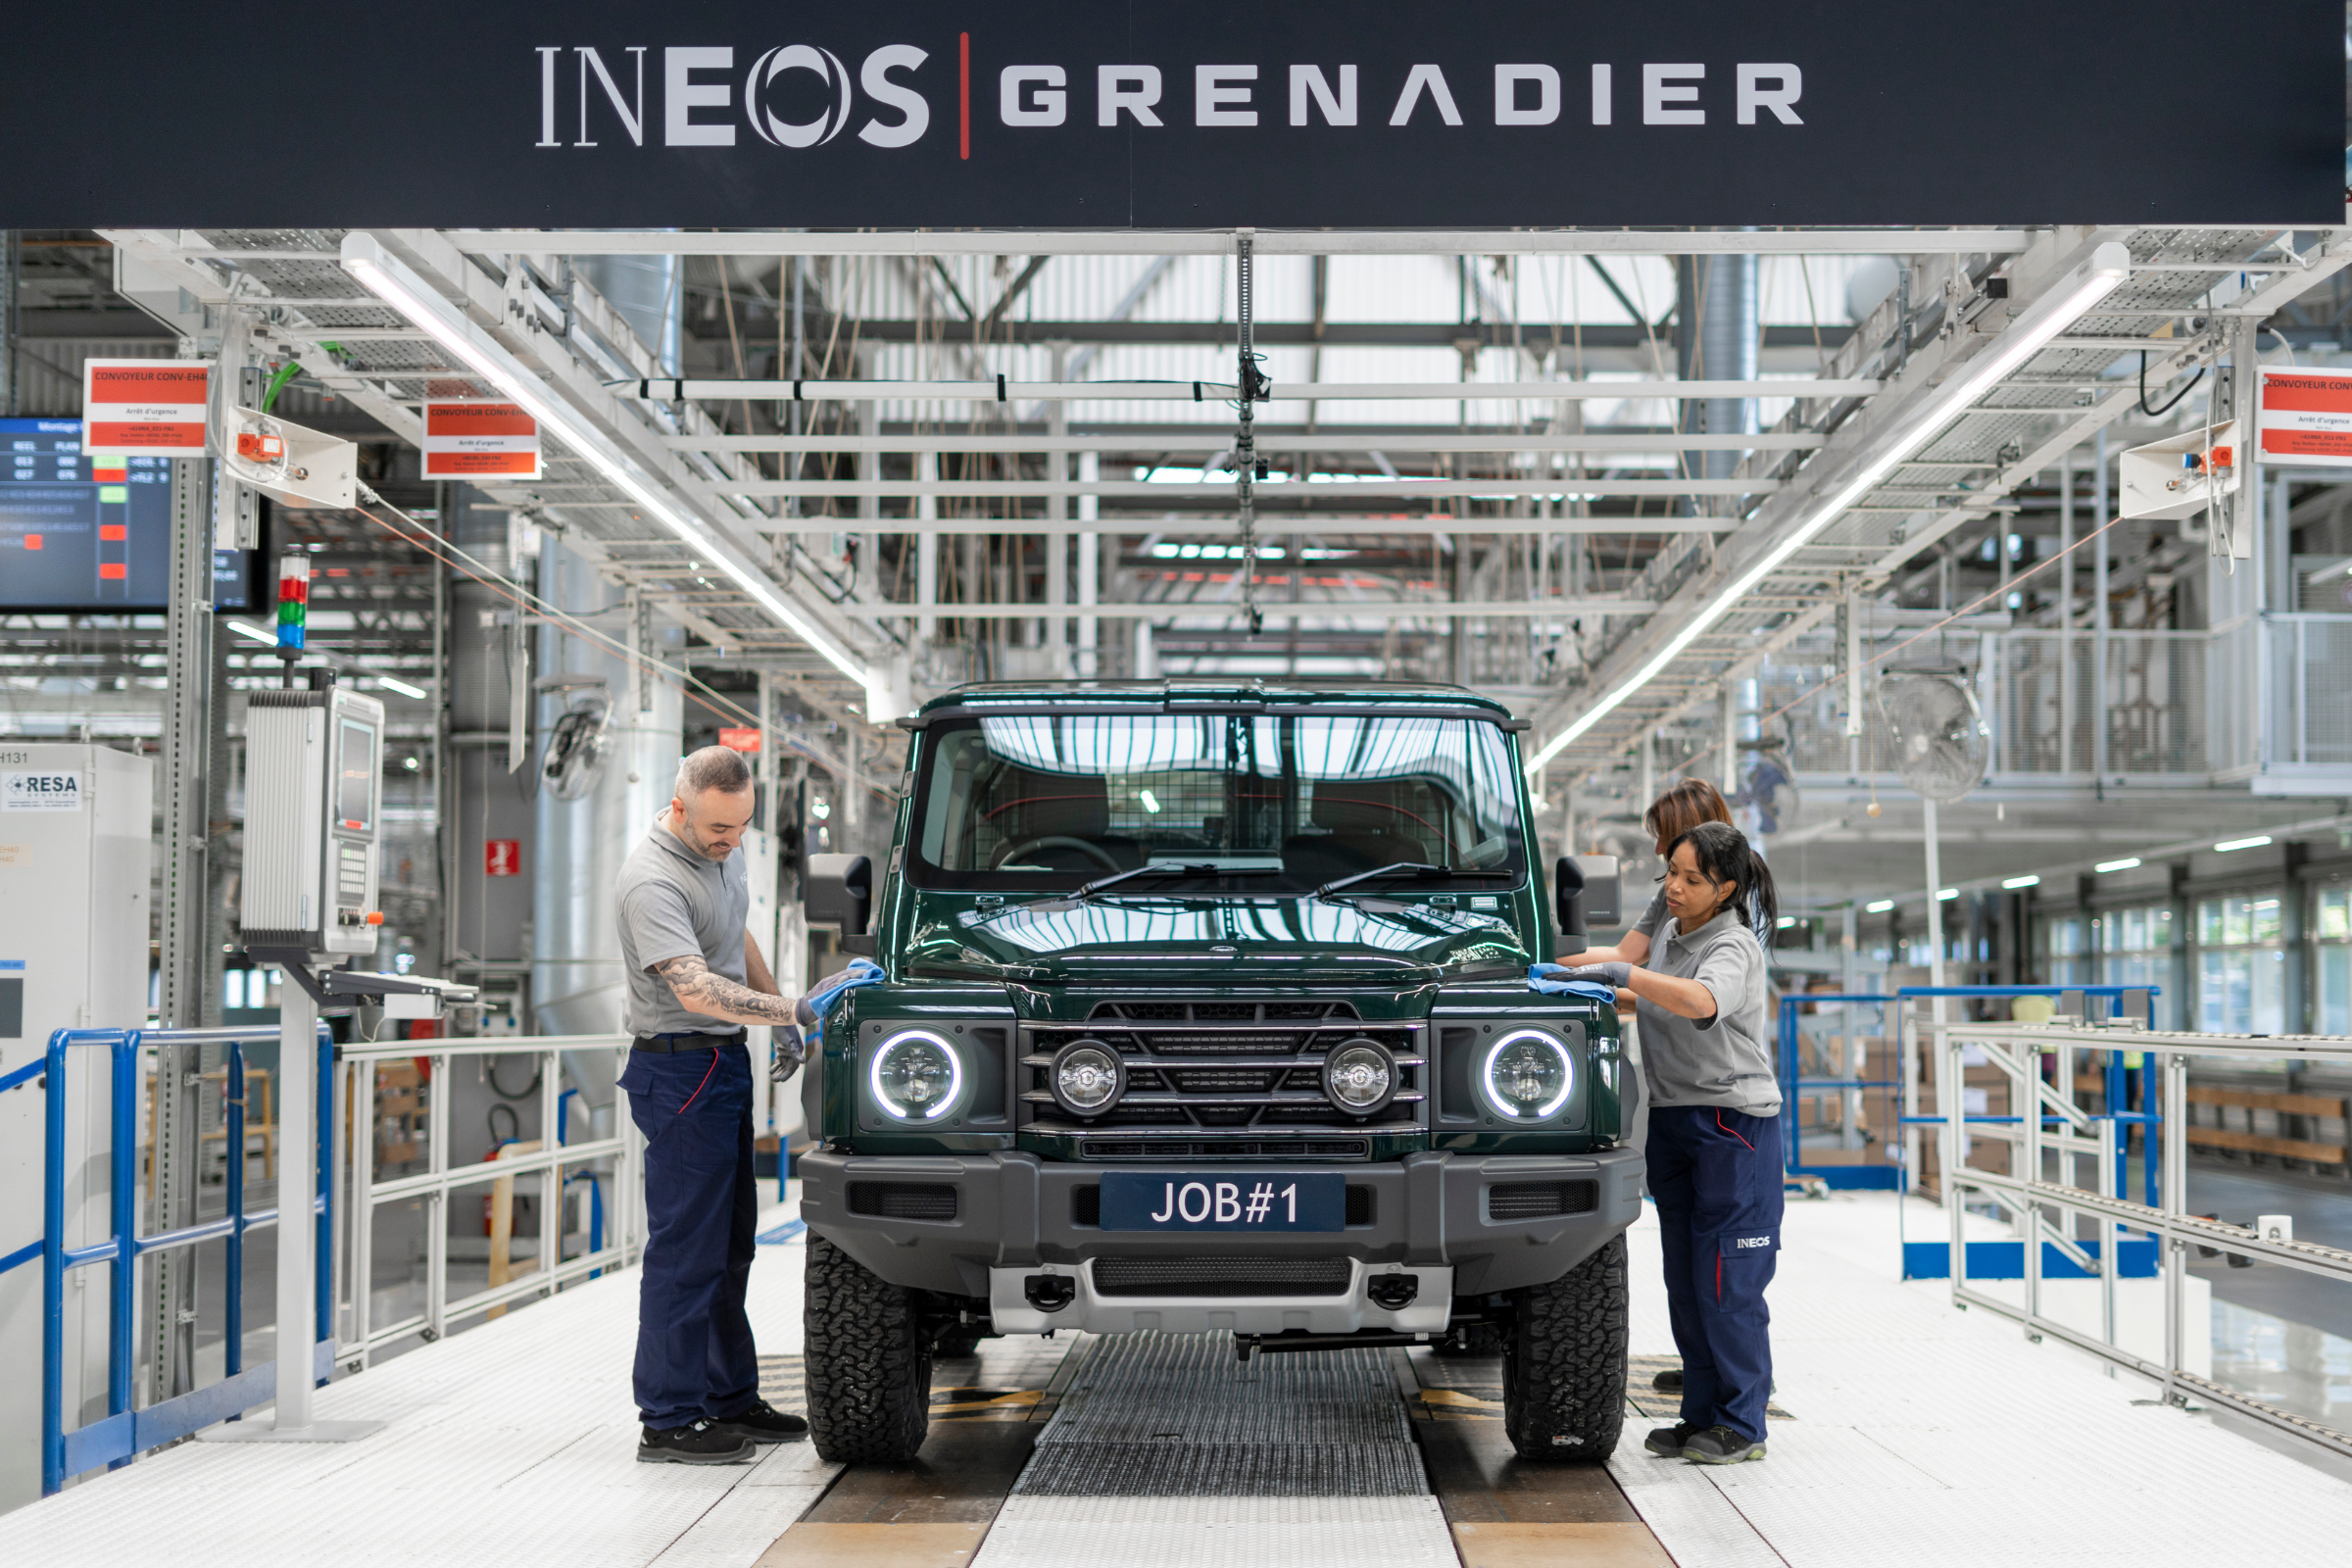 The first INEOS Grenadier is off the production line